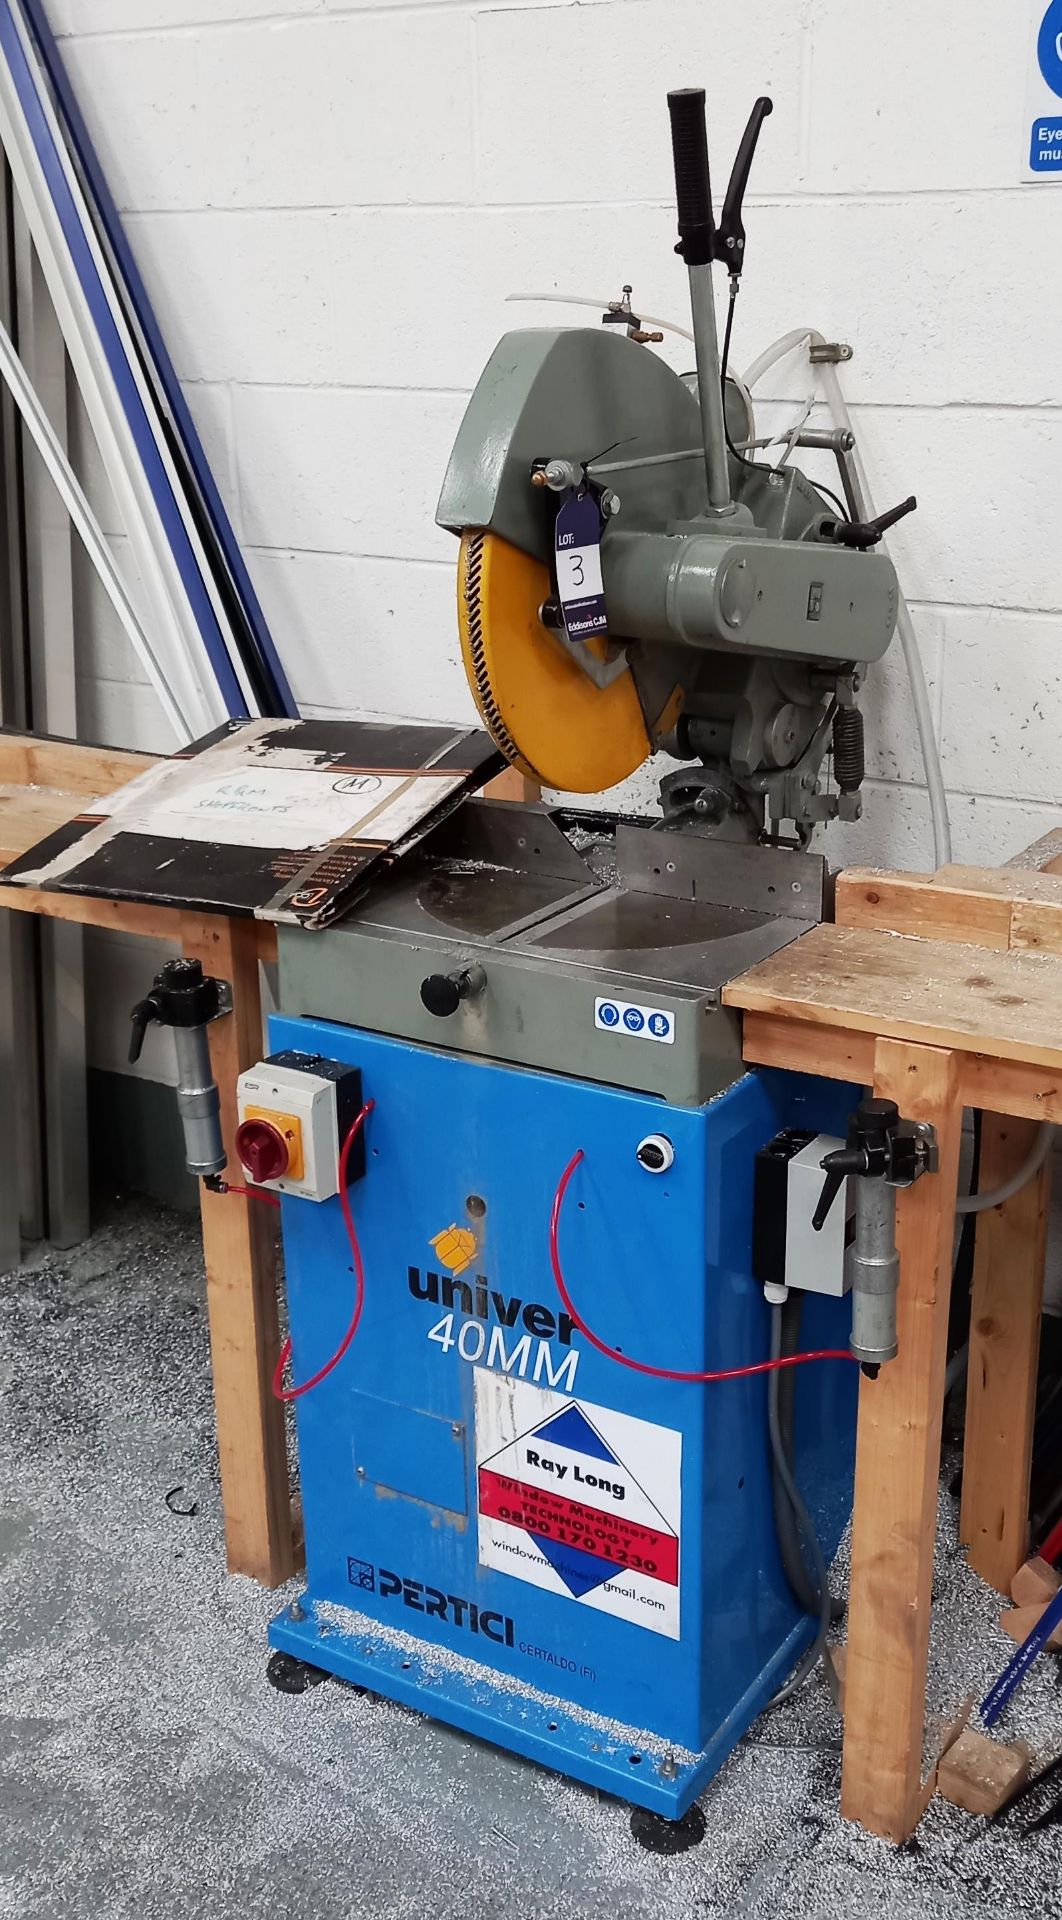 Pertici Univer 40mm model 12S138 Mitre Saw, 121kg, 3 phase (work bench and spare blade included)